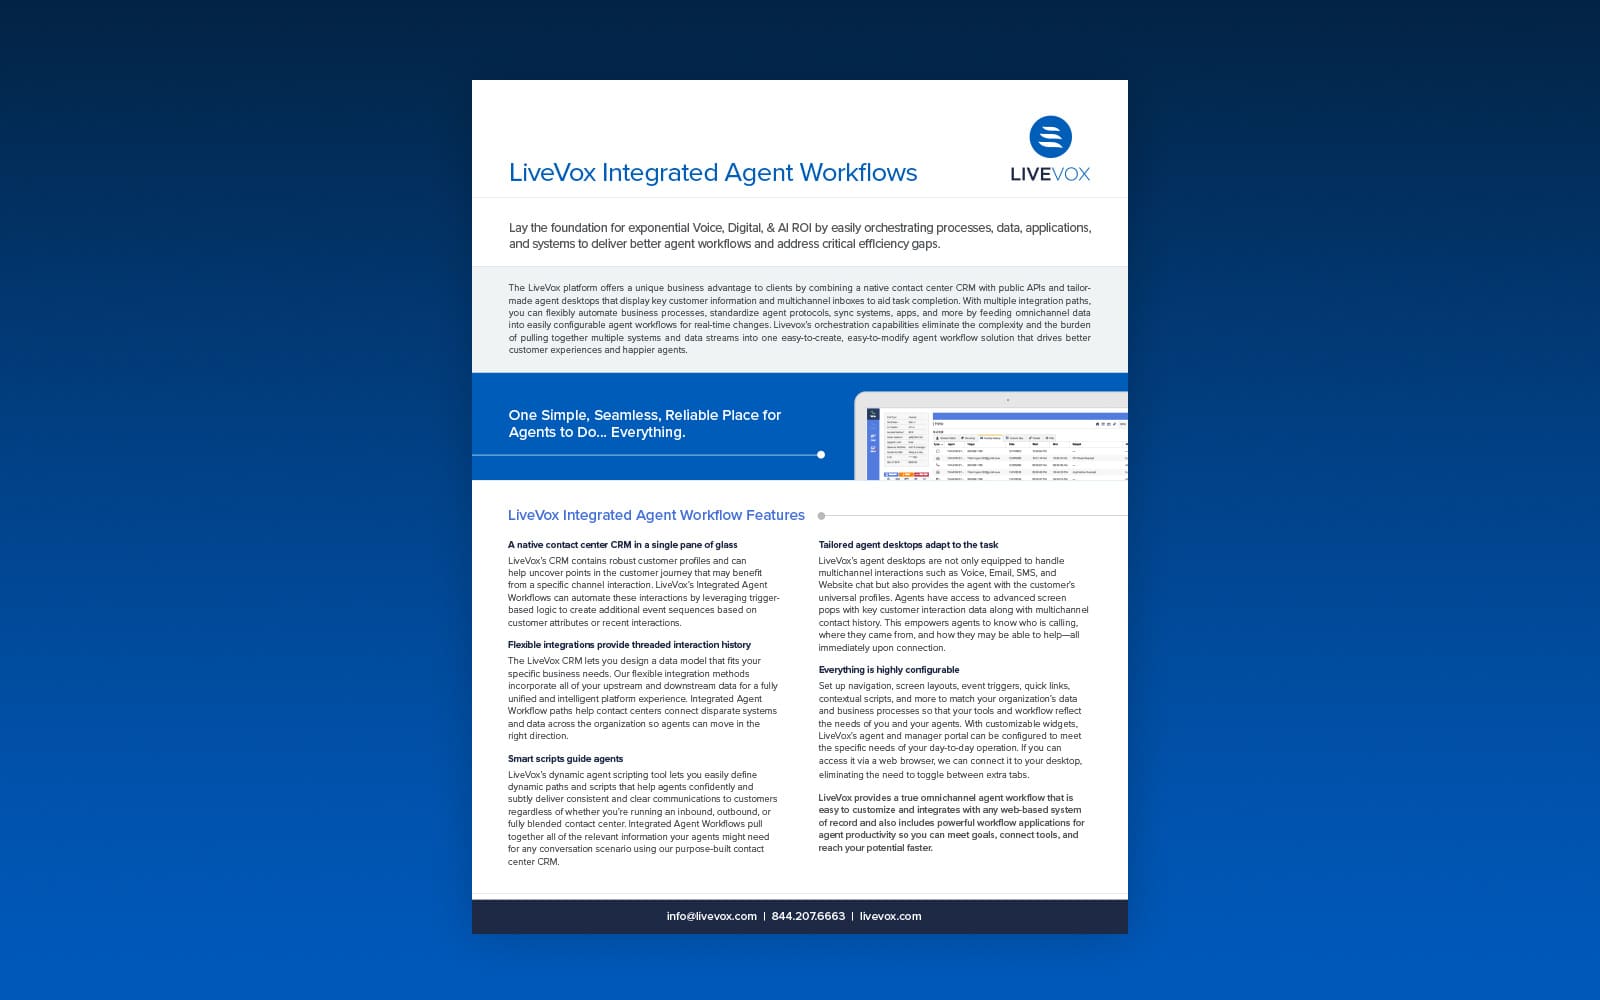 LiveVox [Integrated Agent Workflows / Product Brief]